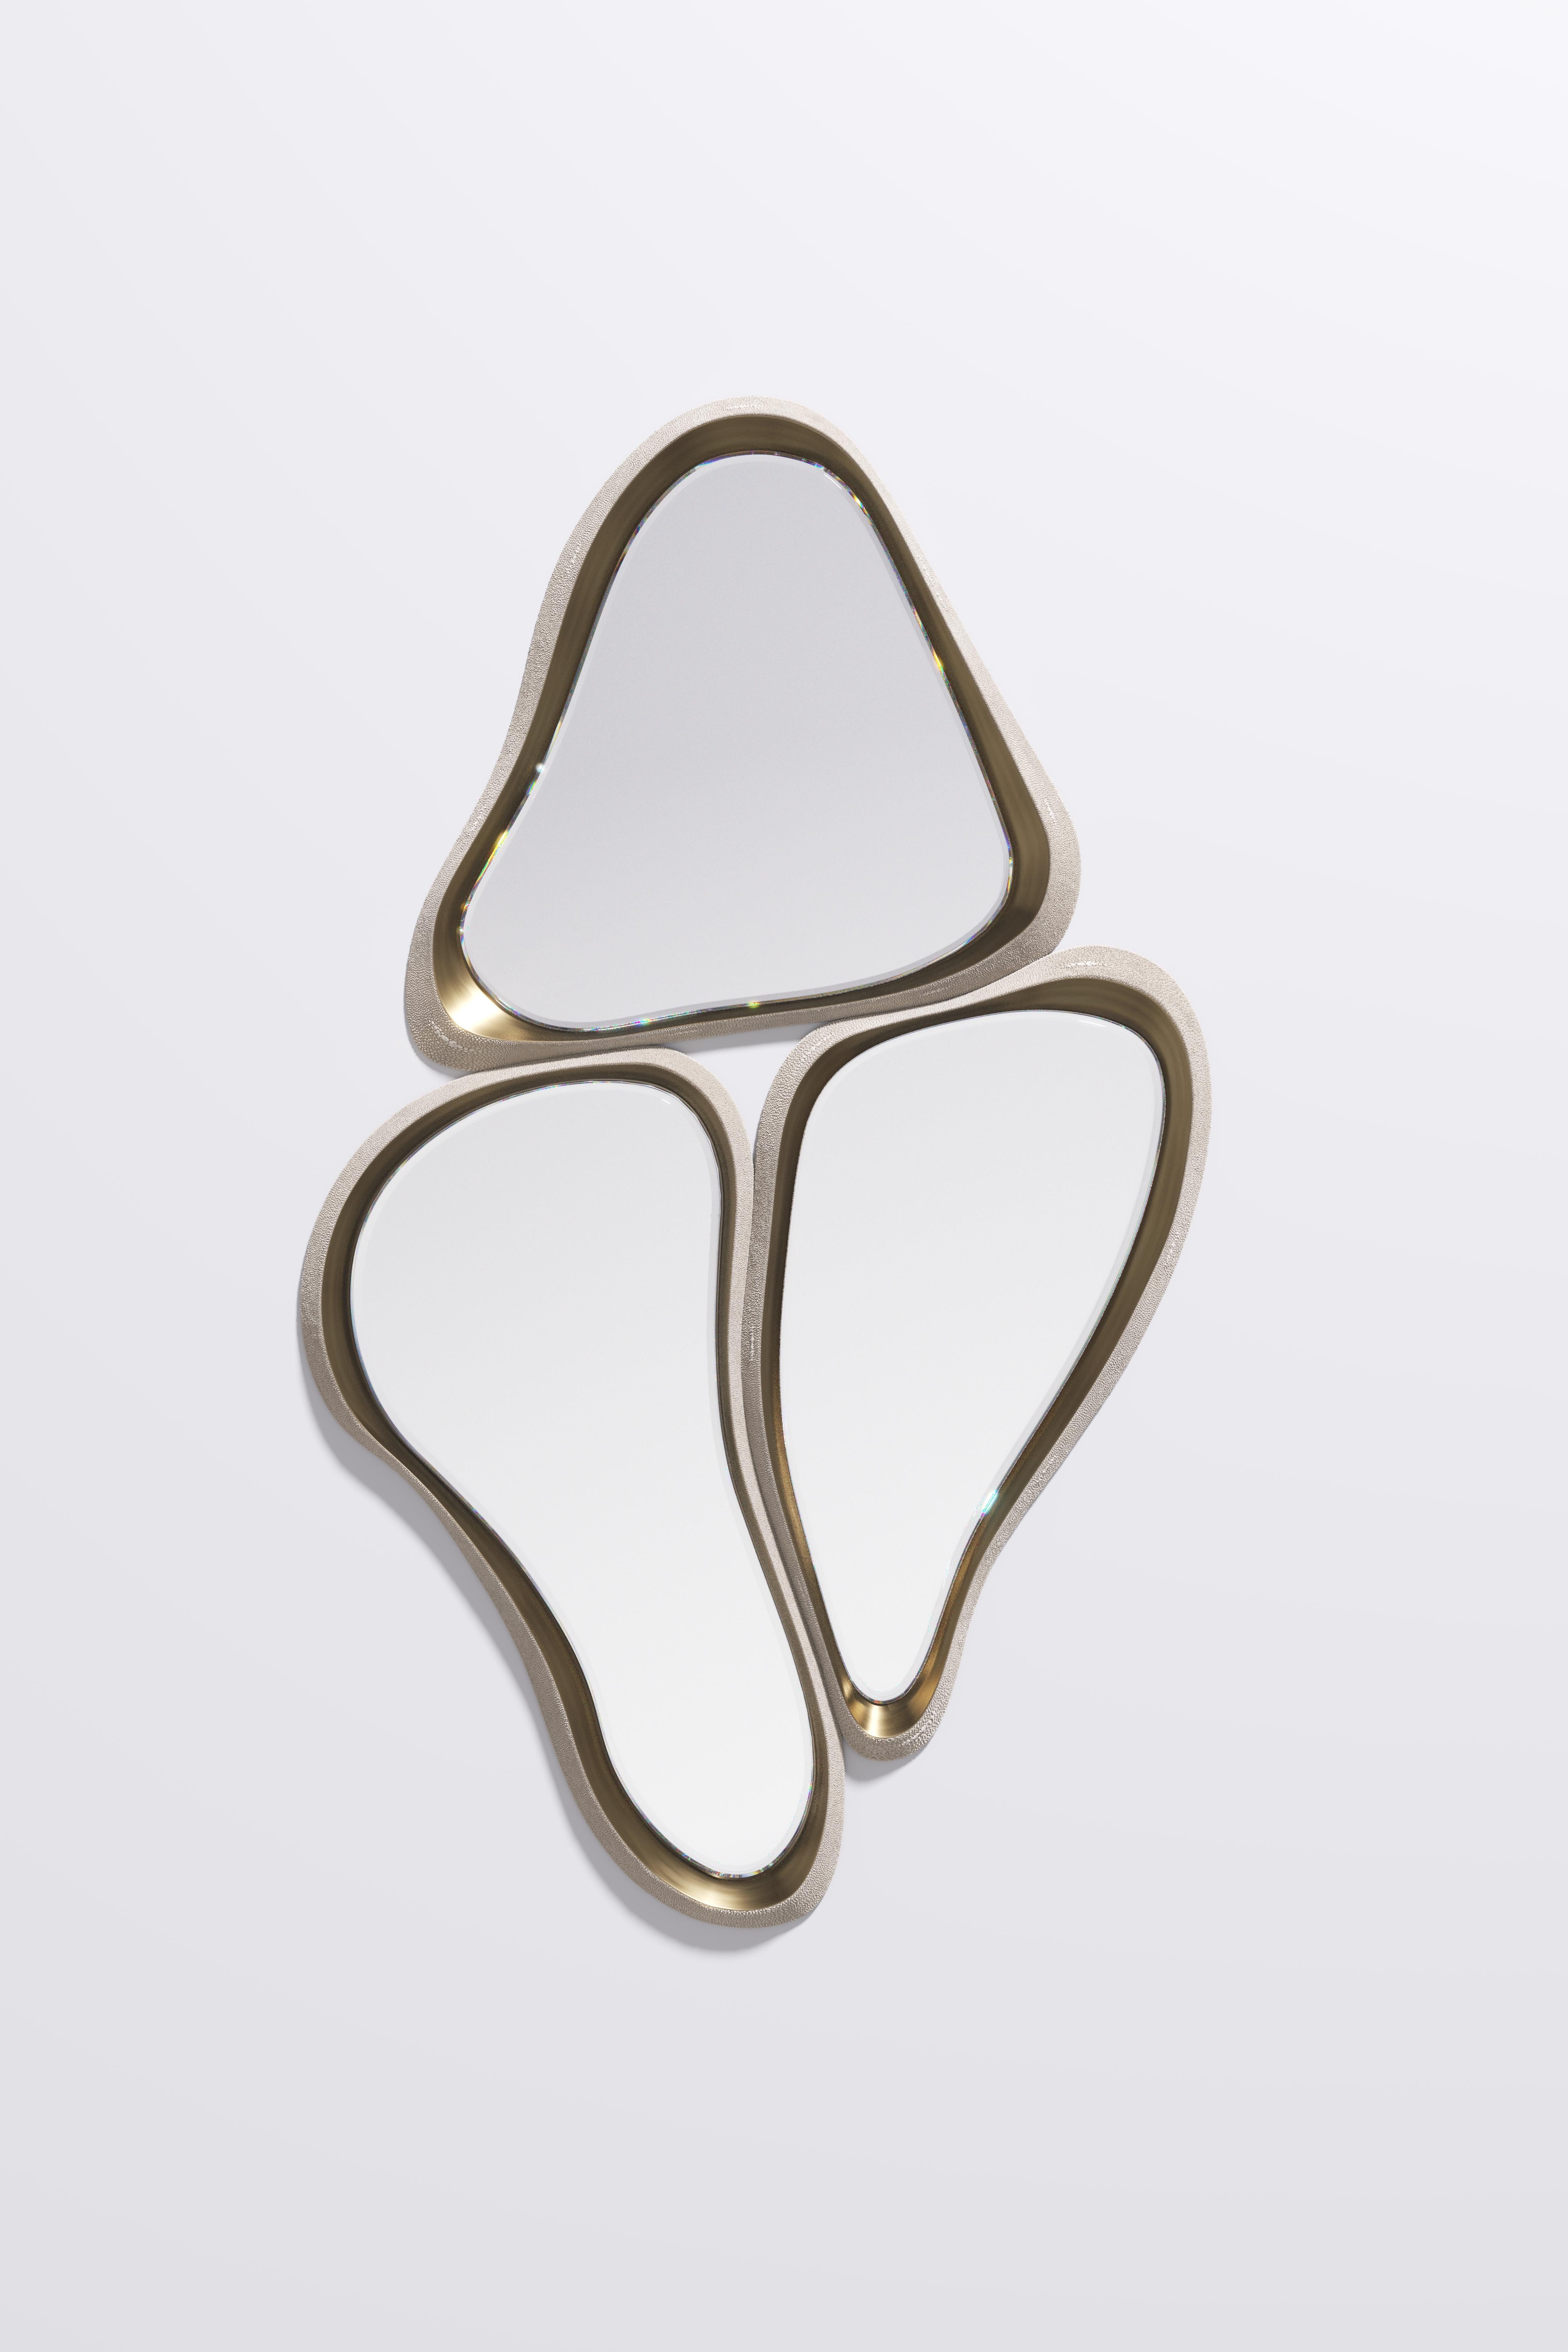 The Mask mirror is a statement and versatile piece. The 3 piece amorphous mirror melt into one another to create a fluid and dramatic expression. The frame is inlaid in bronze-patina brass. Available in other finishes This piece is designed by Kifu